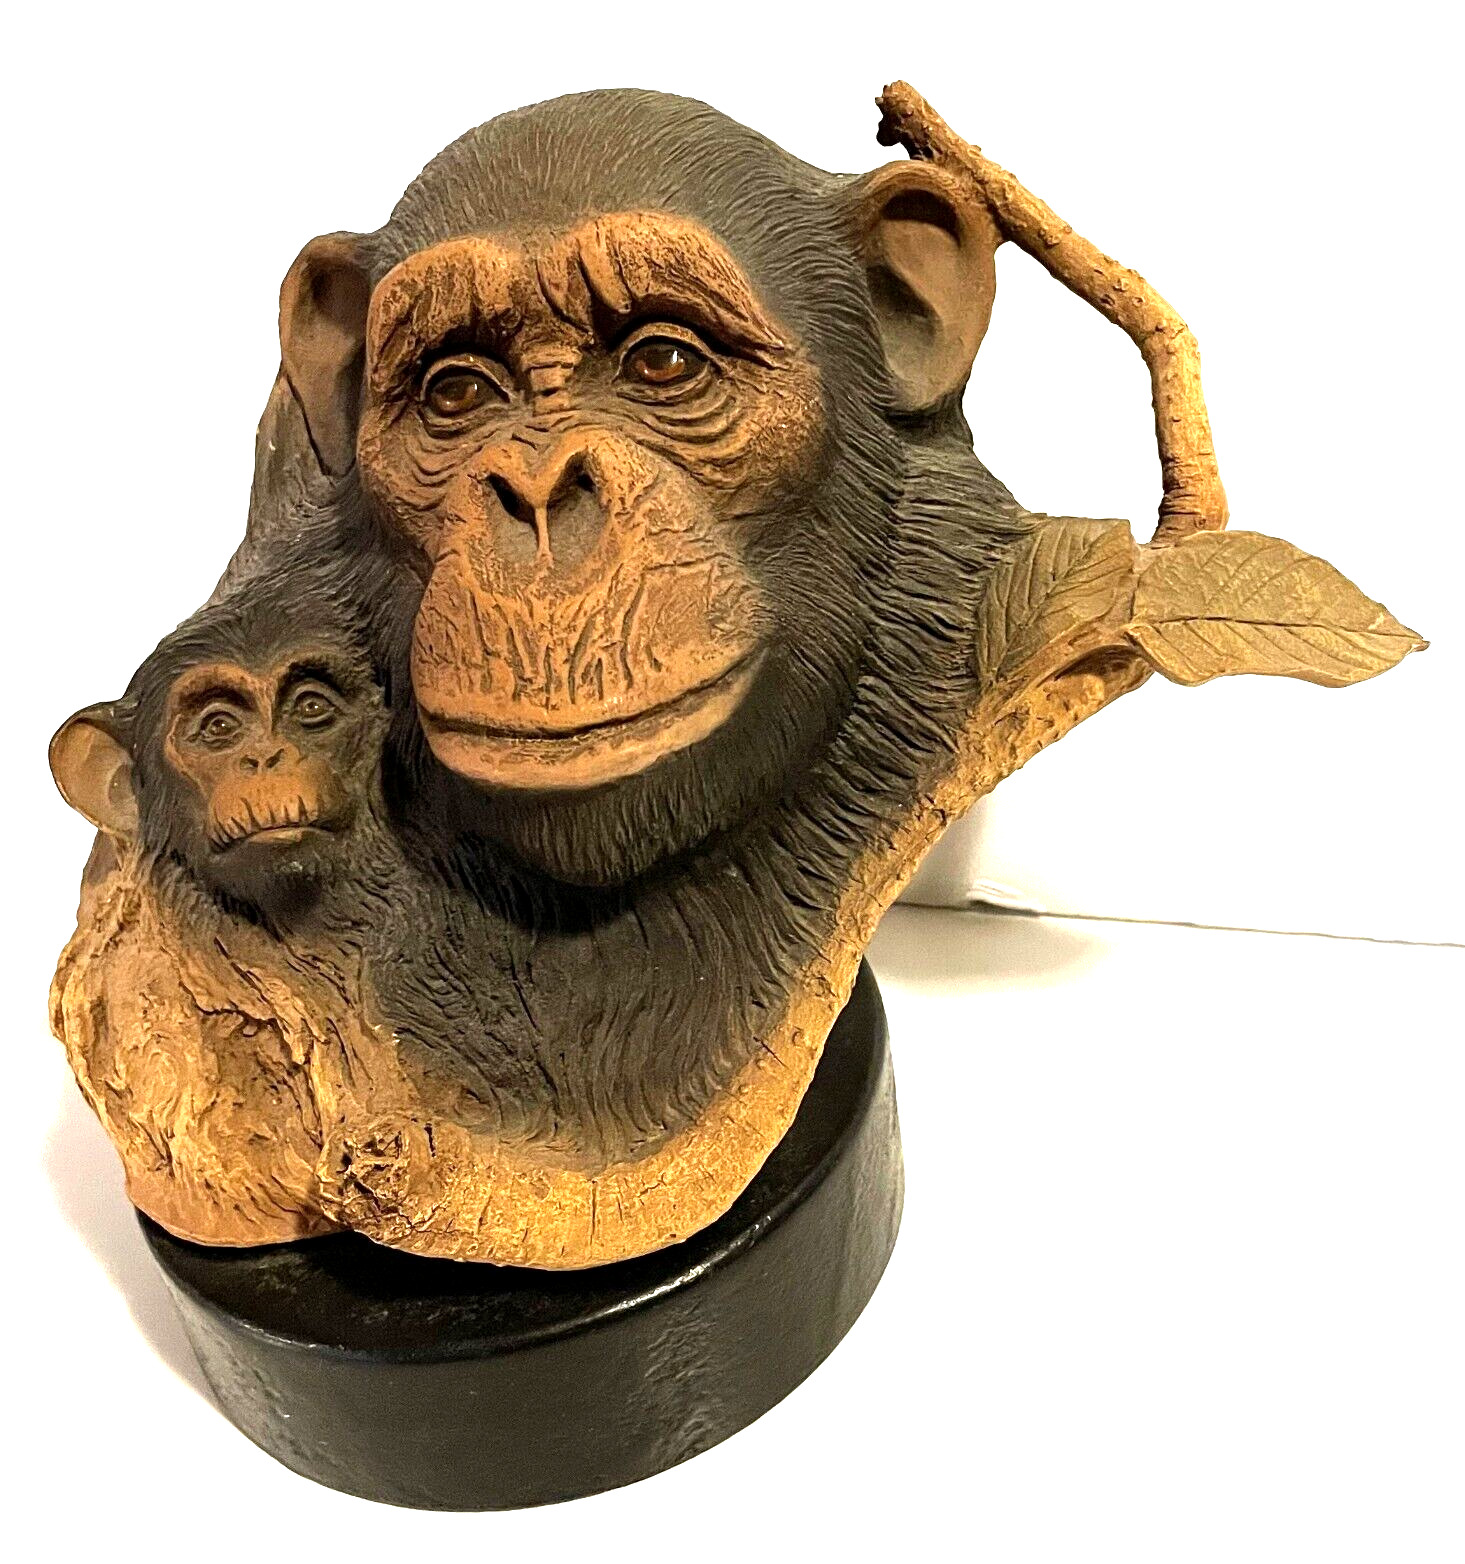 1991 Limited Edition Cameo 478/2000 Rick Cain Sculpture Ape Monkey